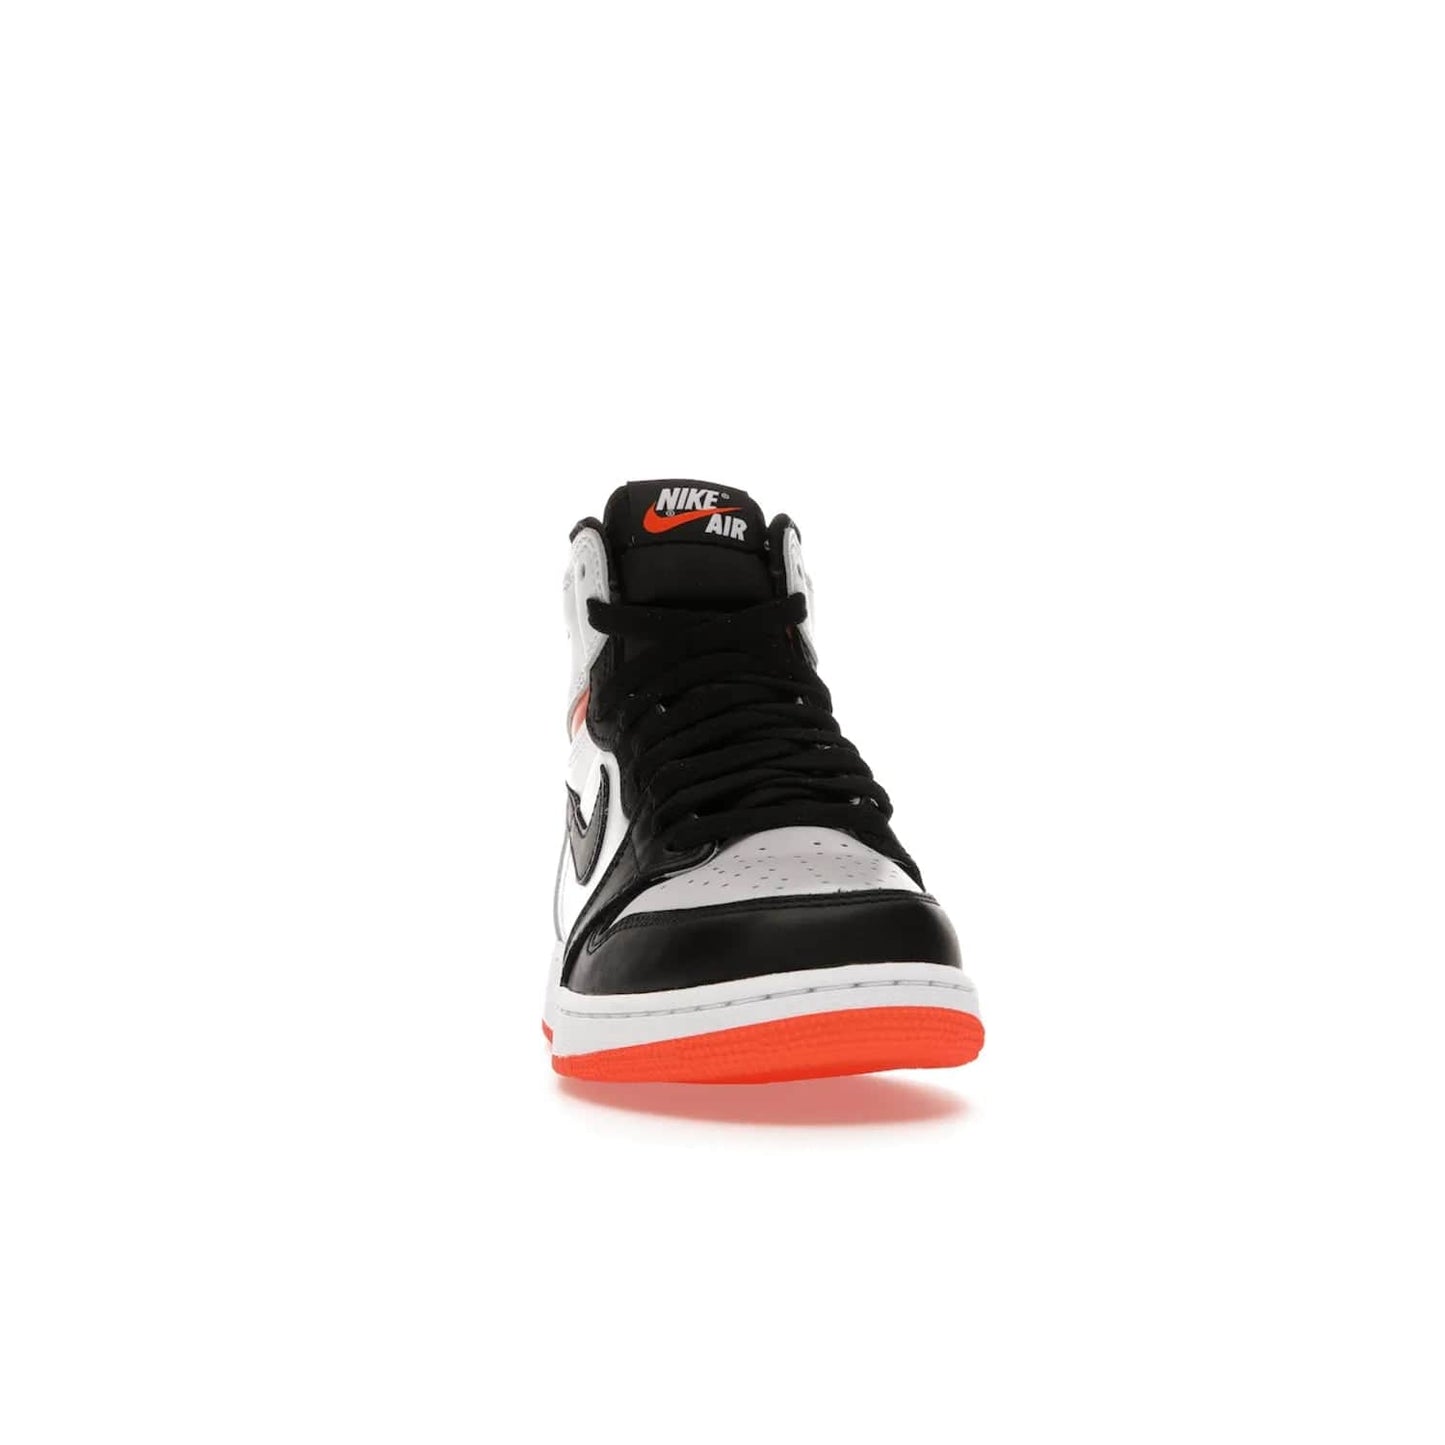 Jordan 1 High OG Electro Orange (GS) - Image 9 - Only at www.BallersClubKickz.com - The Air Jordan 1 High OG Electro Orange GS is the ideal shoe for kids on the go. Featuring white leather uppers, black overlays, and bright orange accents, it's sure to become a favorite. A great mix of classic style and vibrant colors, the shoe delivers air cushioning for comfort and hard orange rubber for grip. Release on July 17th, 2021. Get them a pair today.